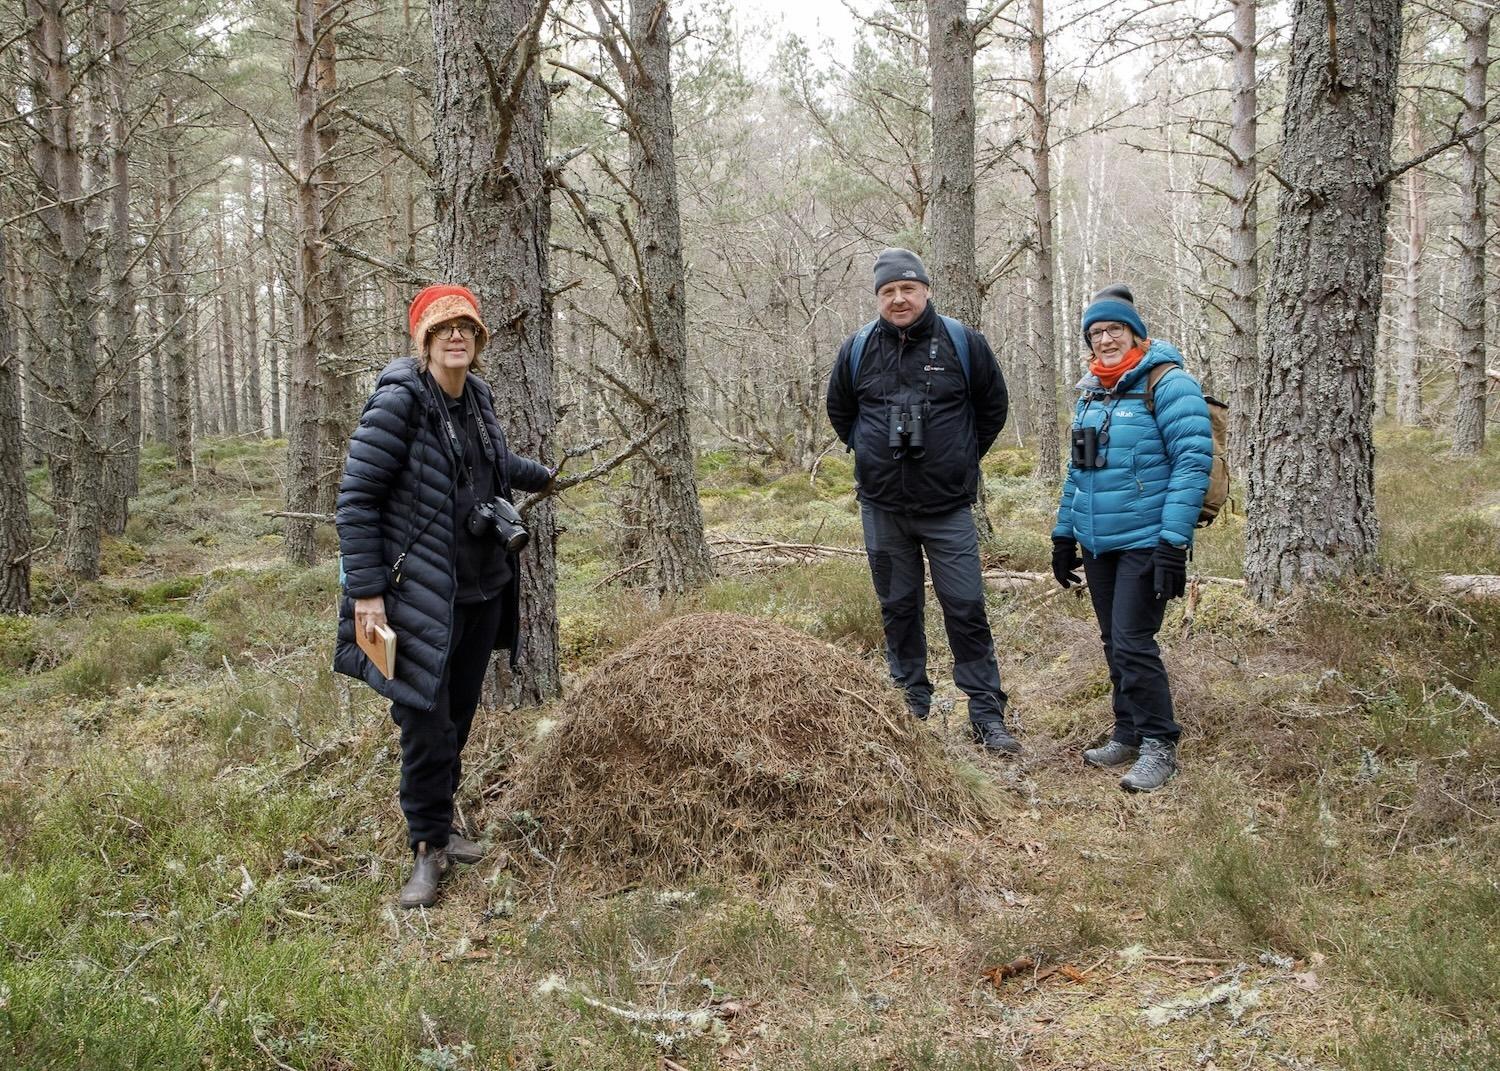 Wilderness Scotland guests Jennifer Bain, Carl Broomhead and Debbie Robson stand by a Scottish wood ant nest in the Abernethy National Nature Reserve.